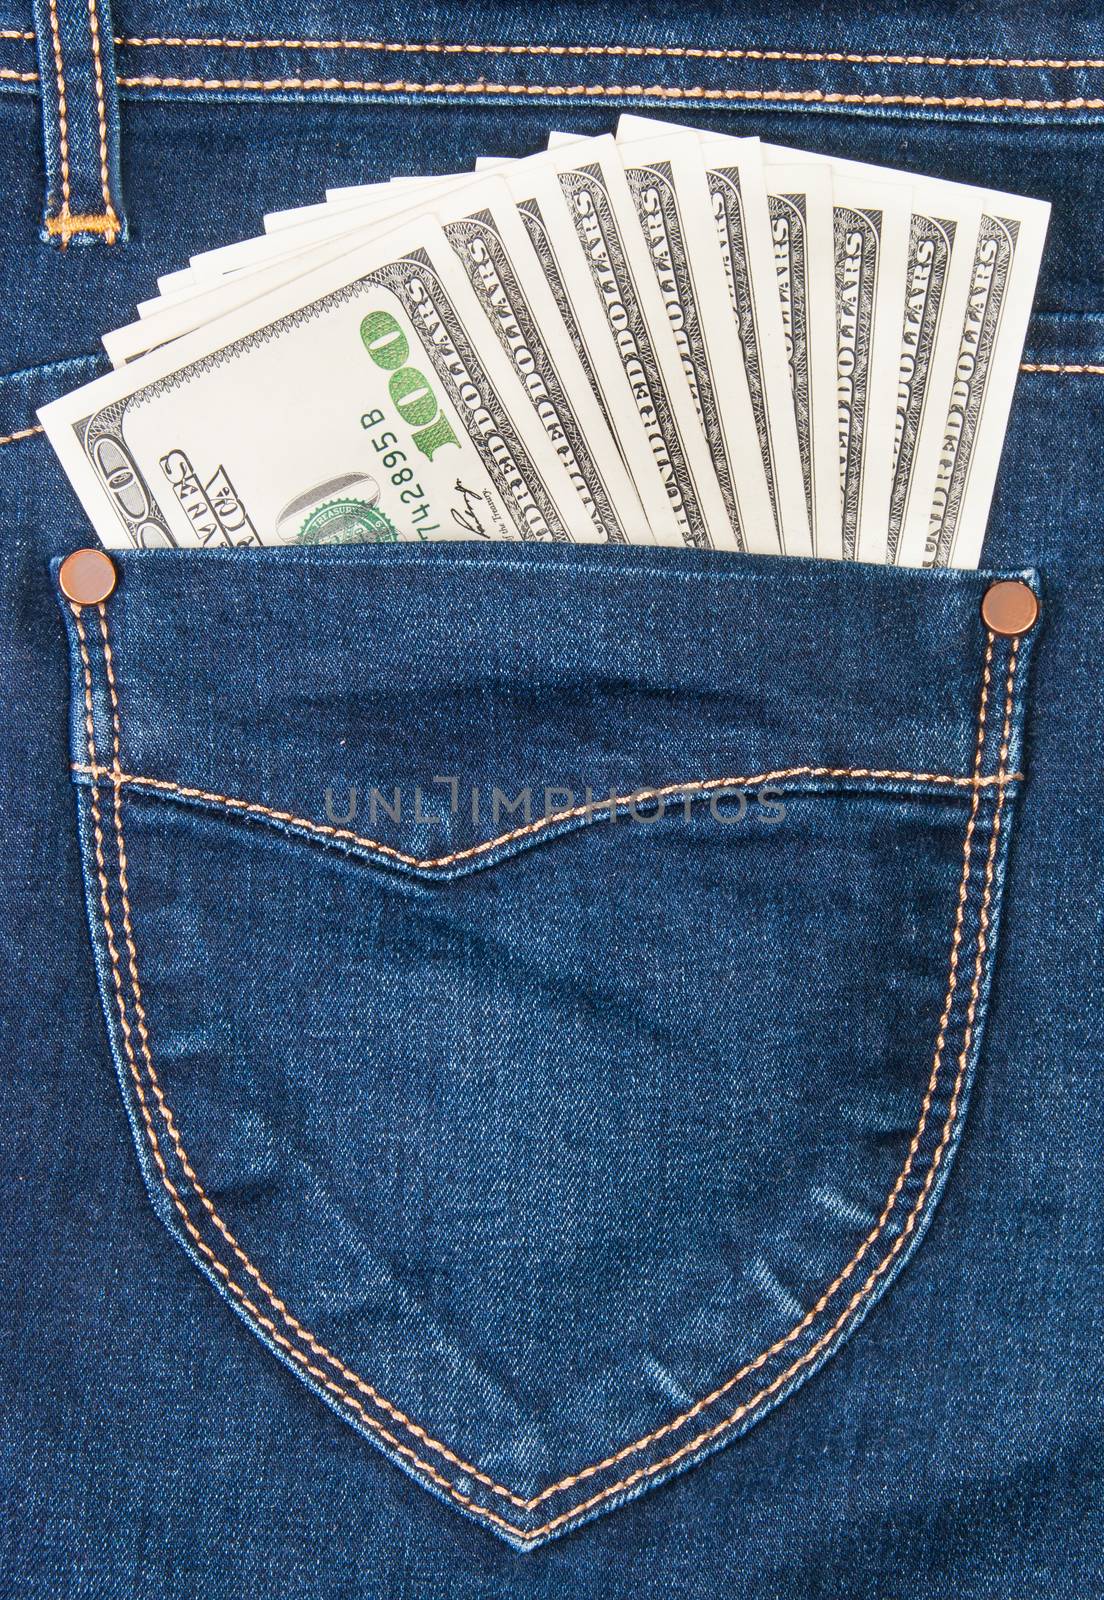 Some Dollars In A Pocket Of Jeans by Cipariss